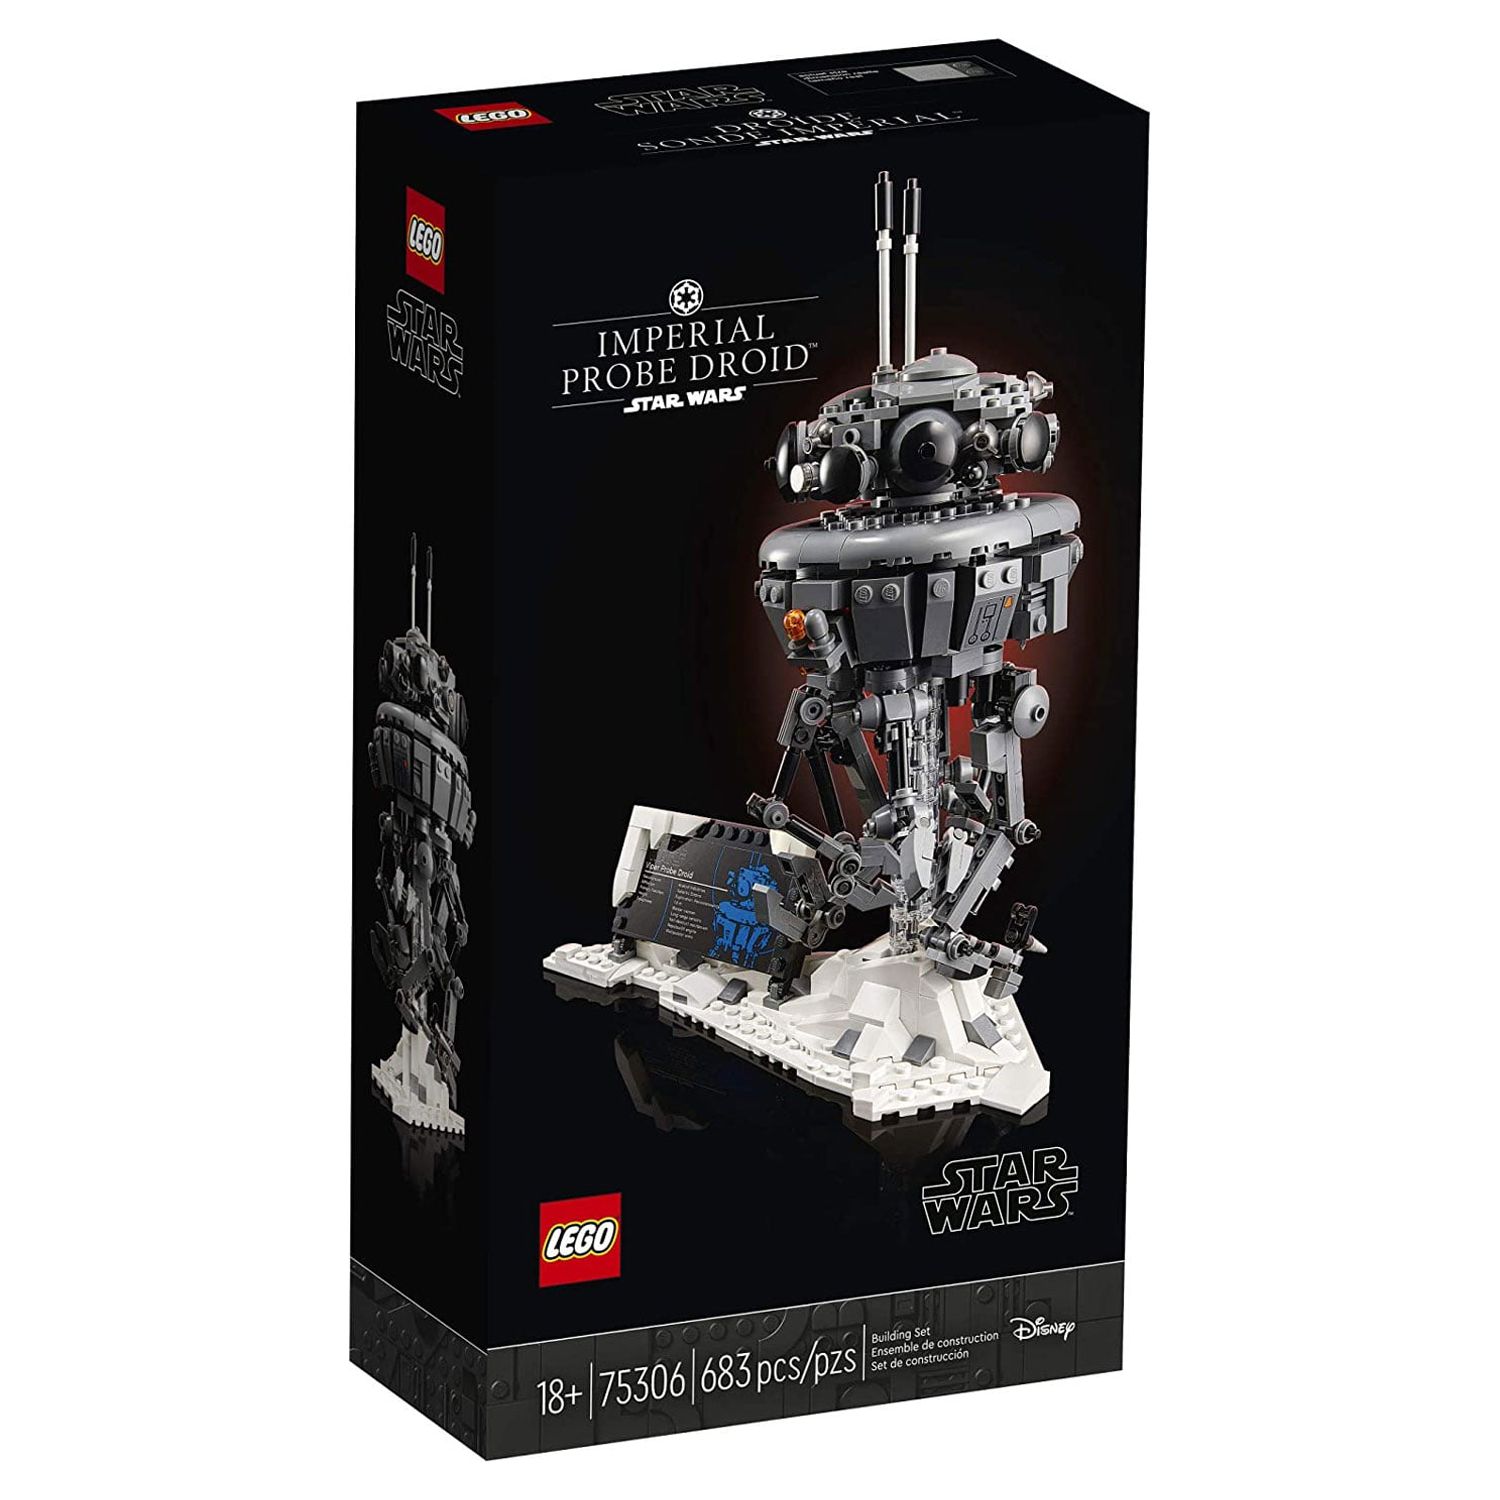 LEGO Star Wars Imperial Probe Droid 75306 Collectible Building Toy (683 Pieces) - image 5 of 8